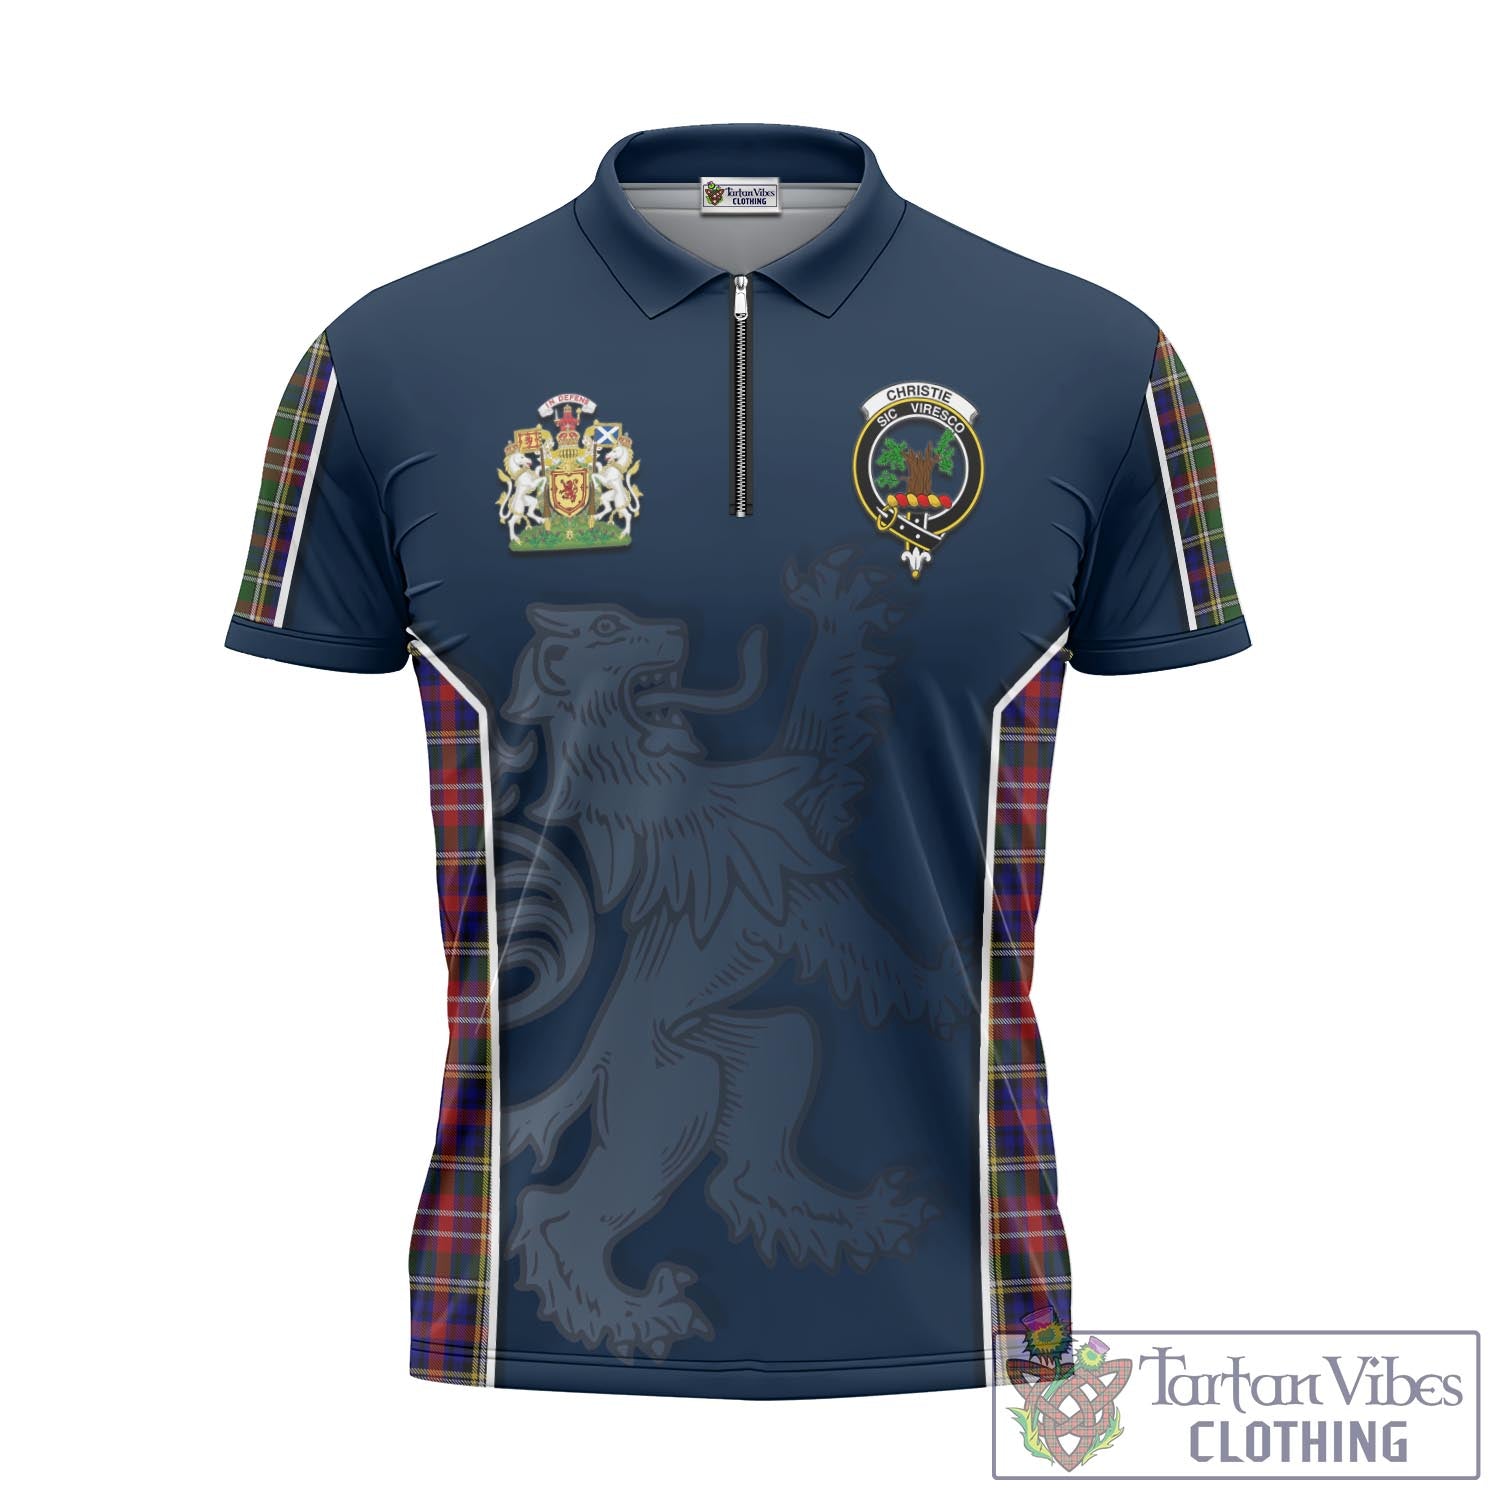 Tartan Vibes Clothing Christie Tartan Zipper Polo Shirt with Family Crest and Lion Rampant Vibes Sport Style